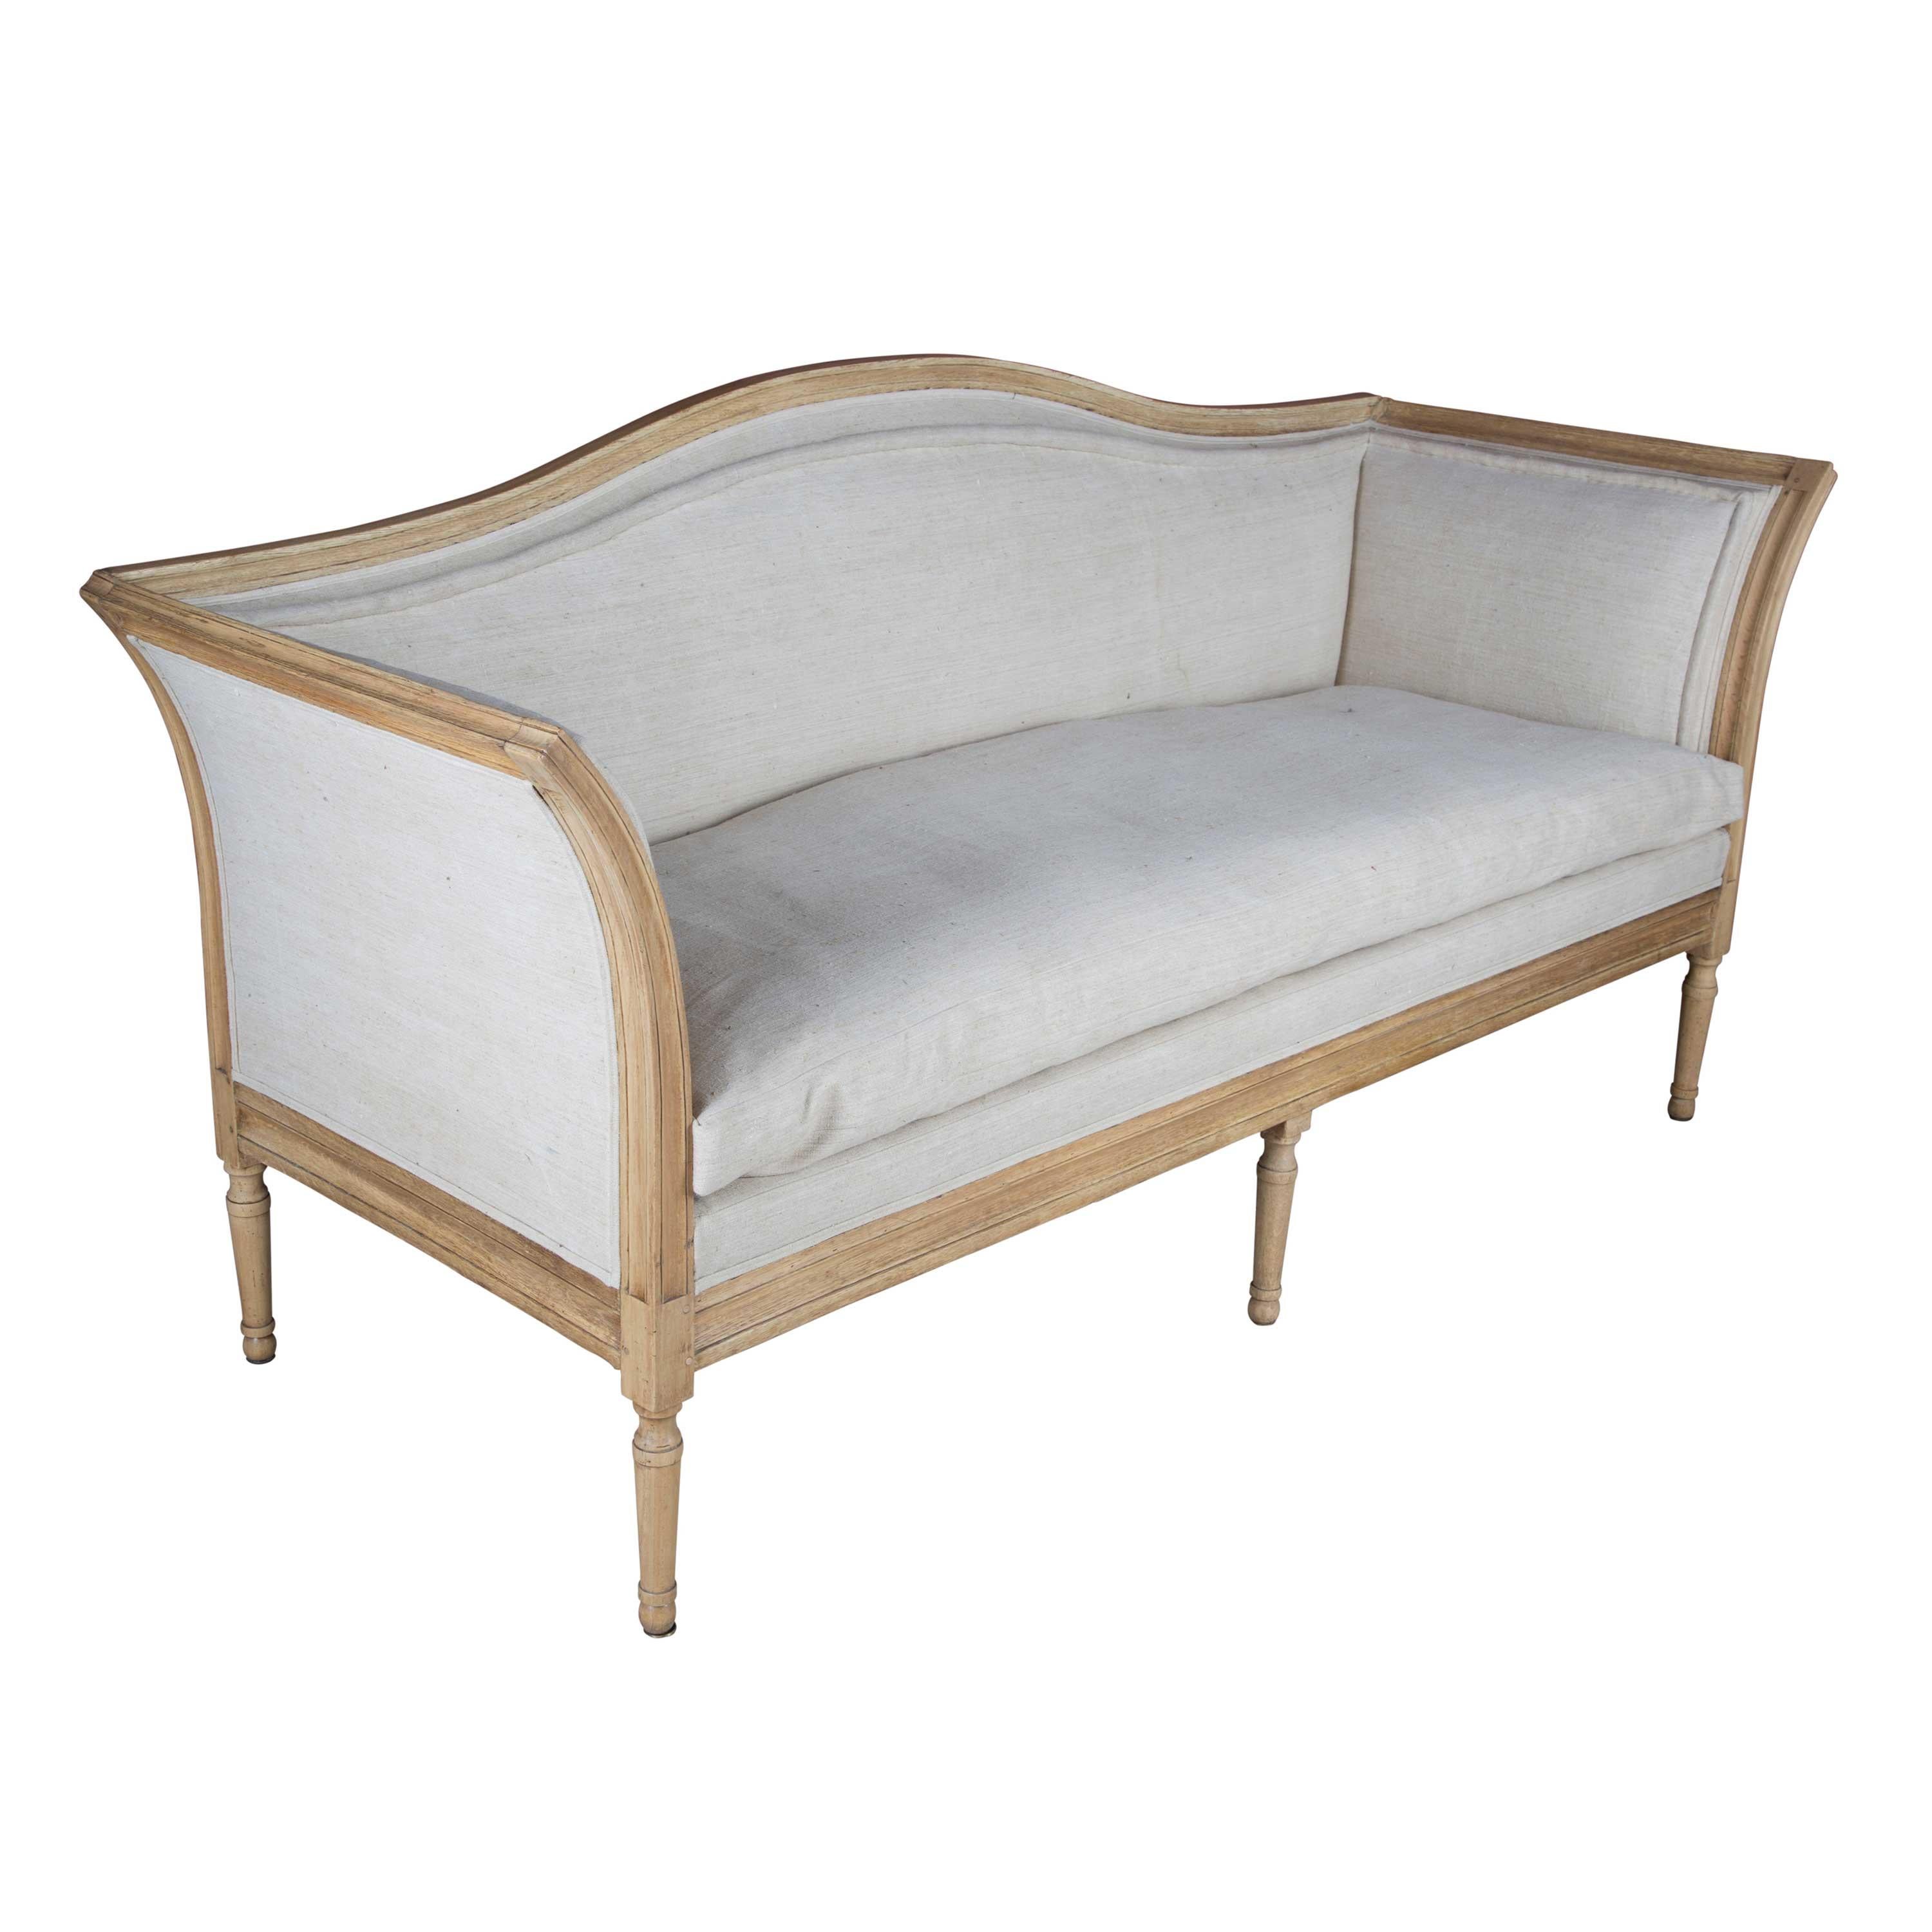 Elegant and shapely French sofa, circa 1890 with bleached frame and stunning hand stitched upholstery.